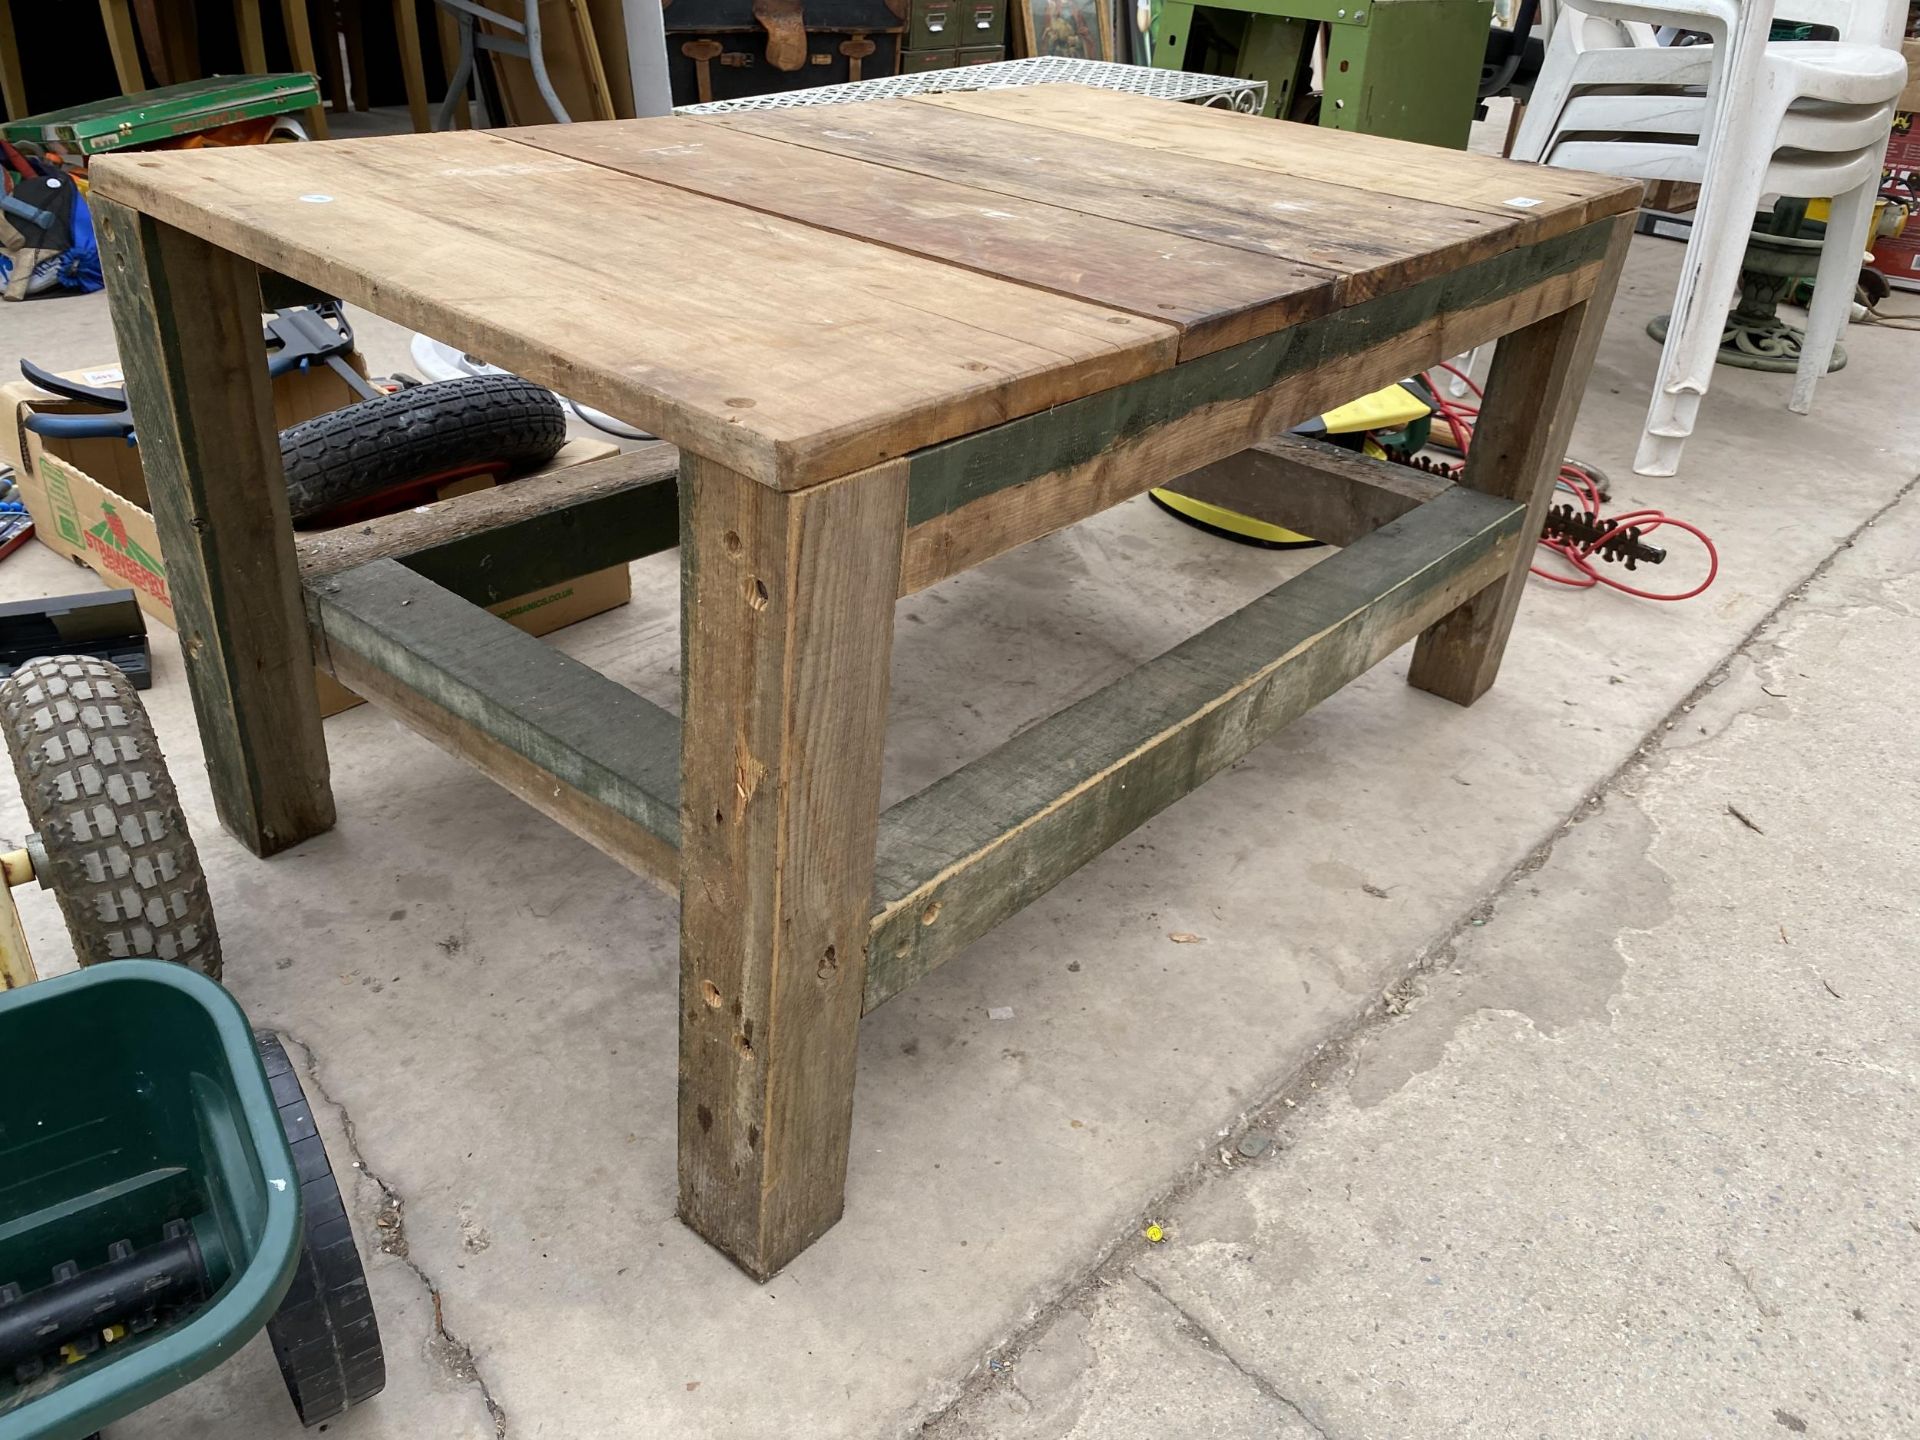 A WOODEN PLANK TOP OUTDOOR COFFEE TABLE - Image 2 of 2